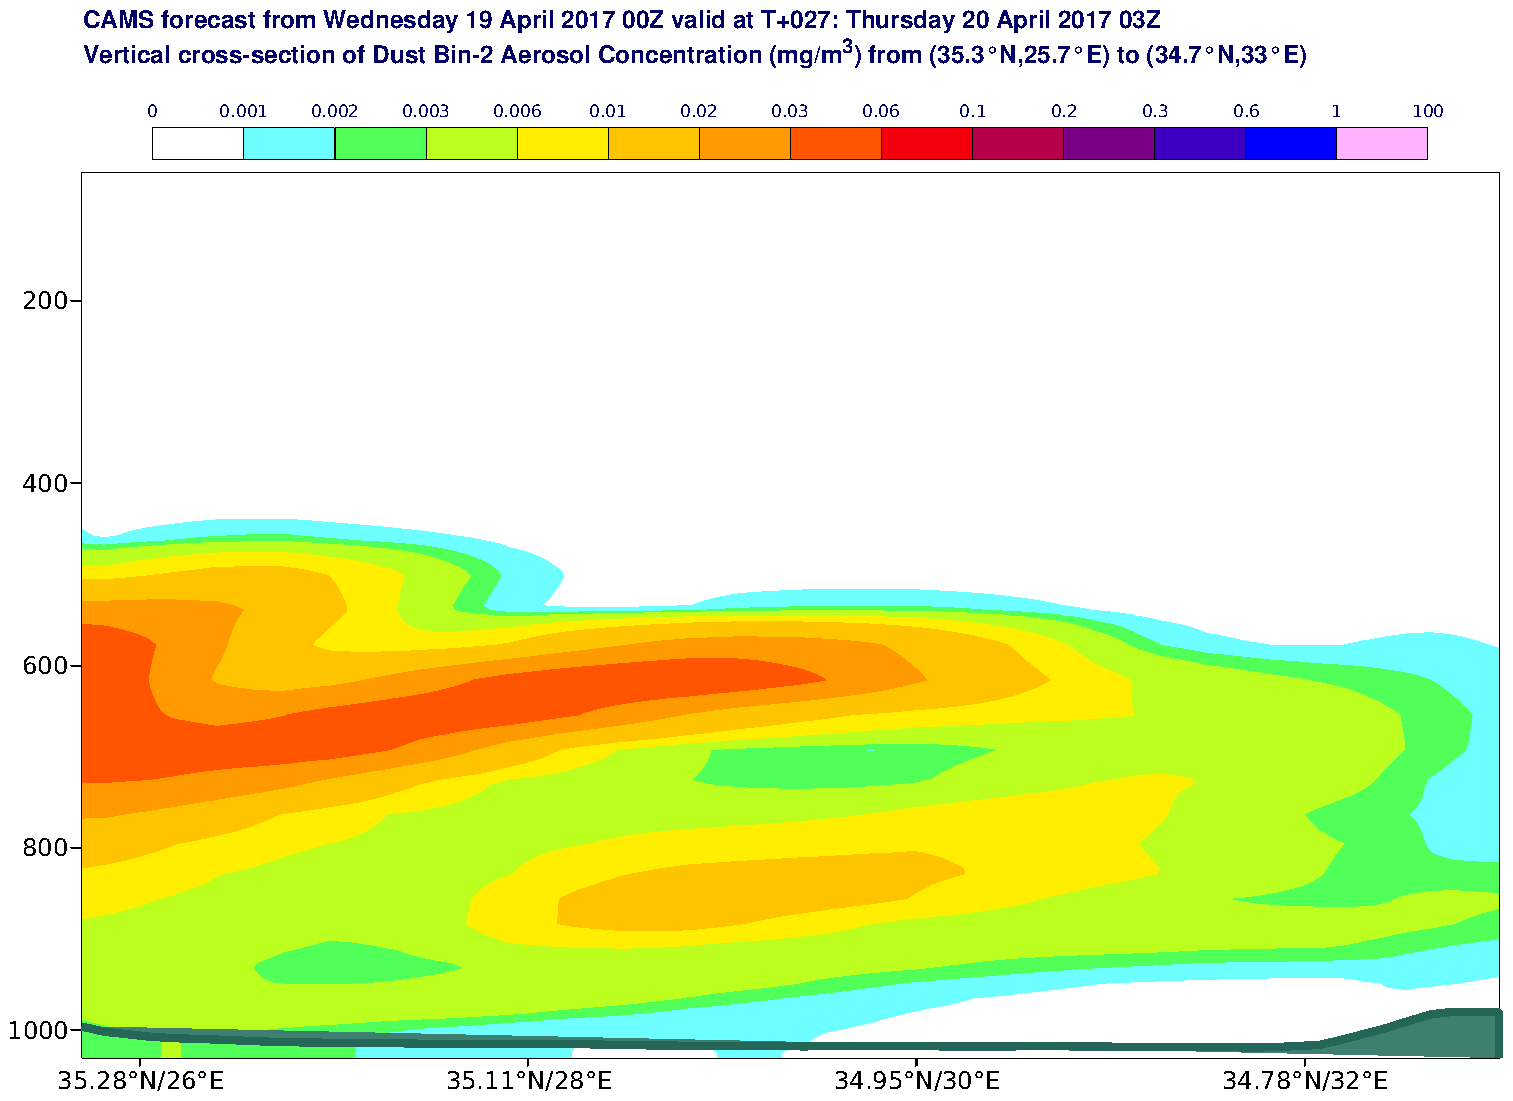 Vertical cross-section of Dust Bin-2 Aerosol Concentration (mg/m3) valid at T27 - 2017-04-20 03:00